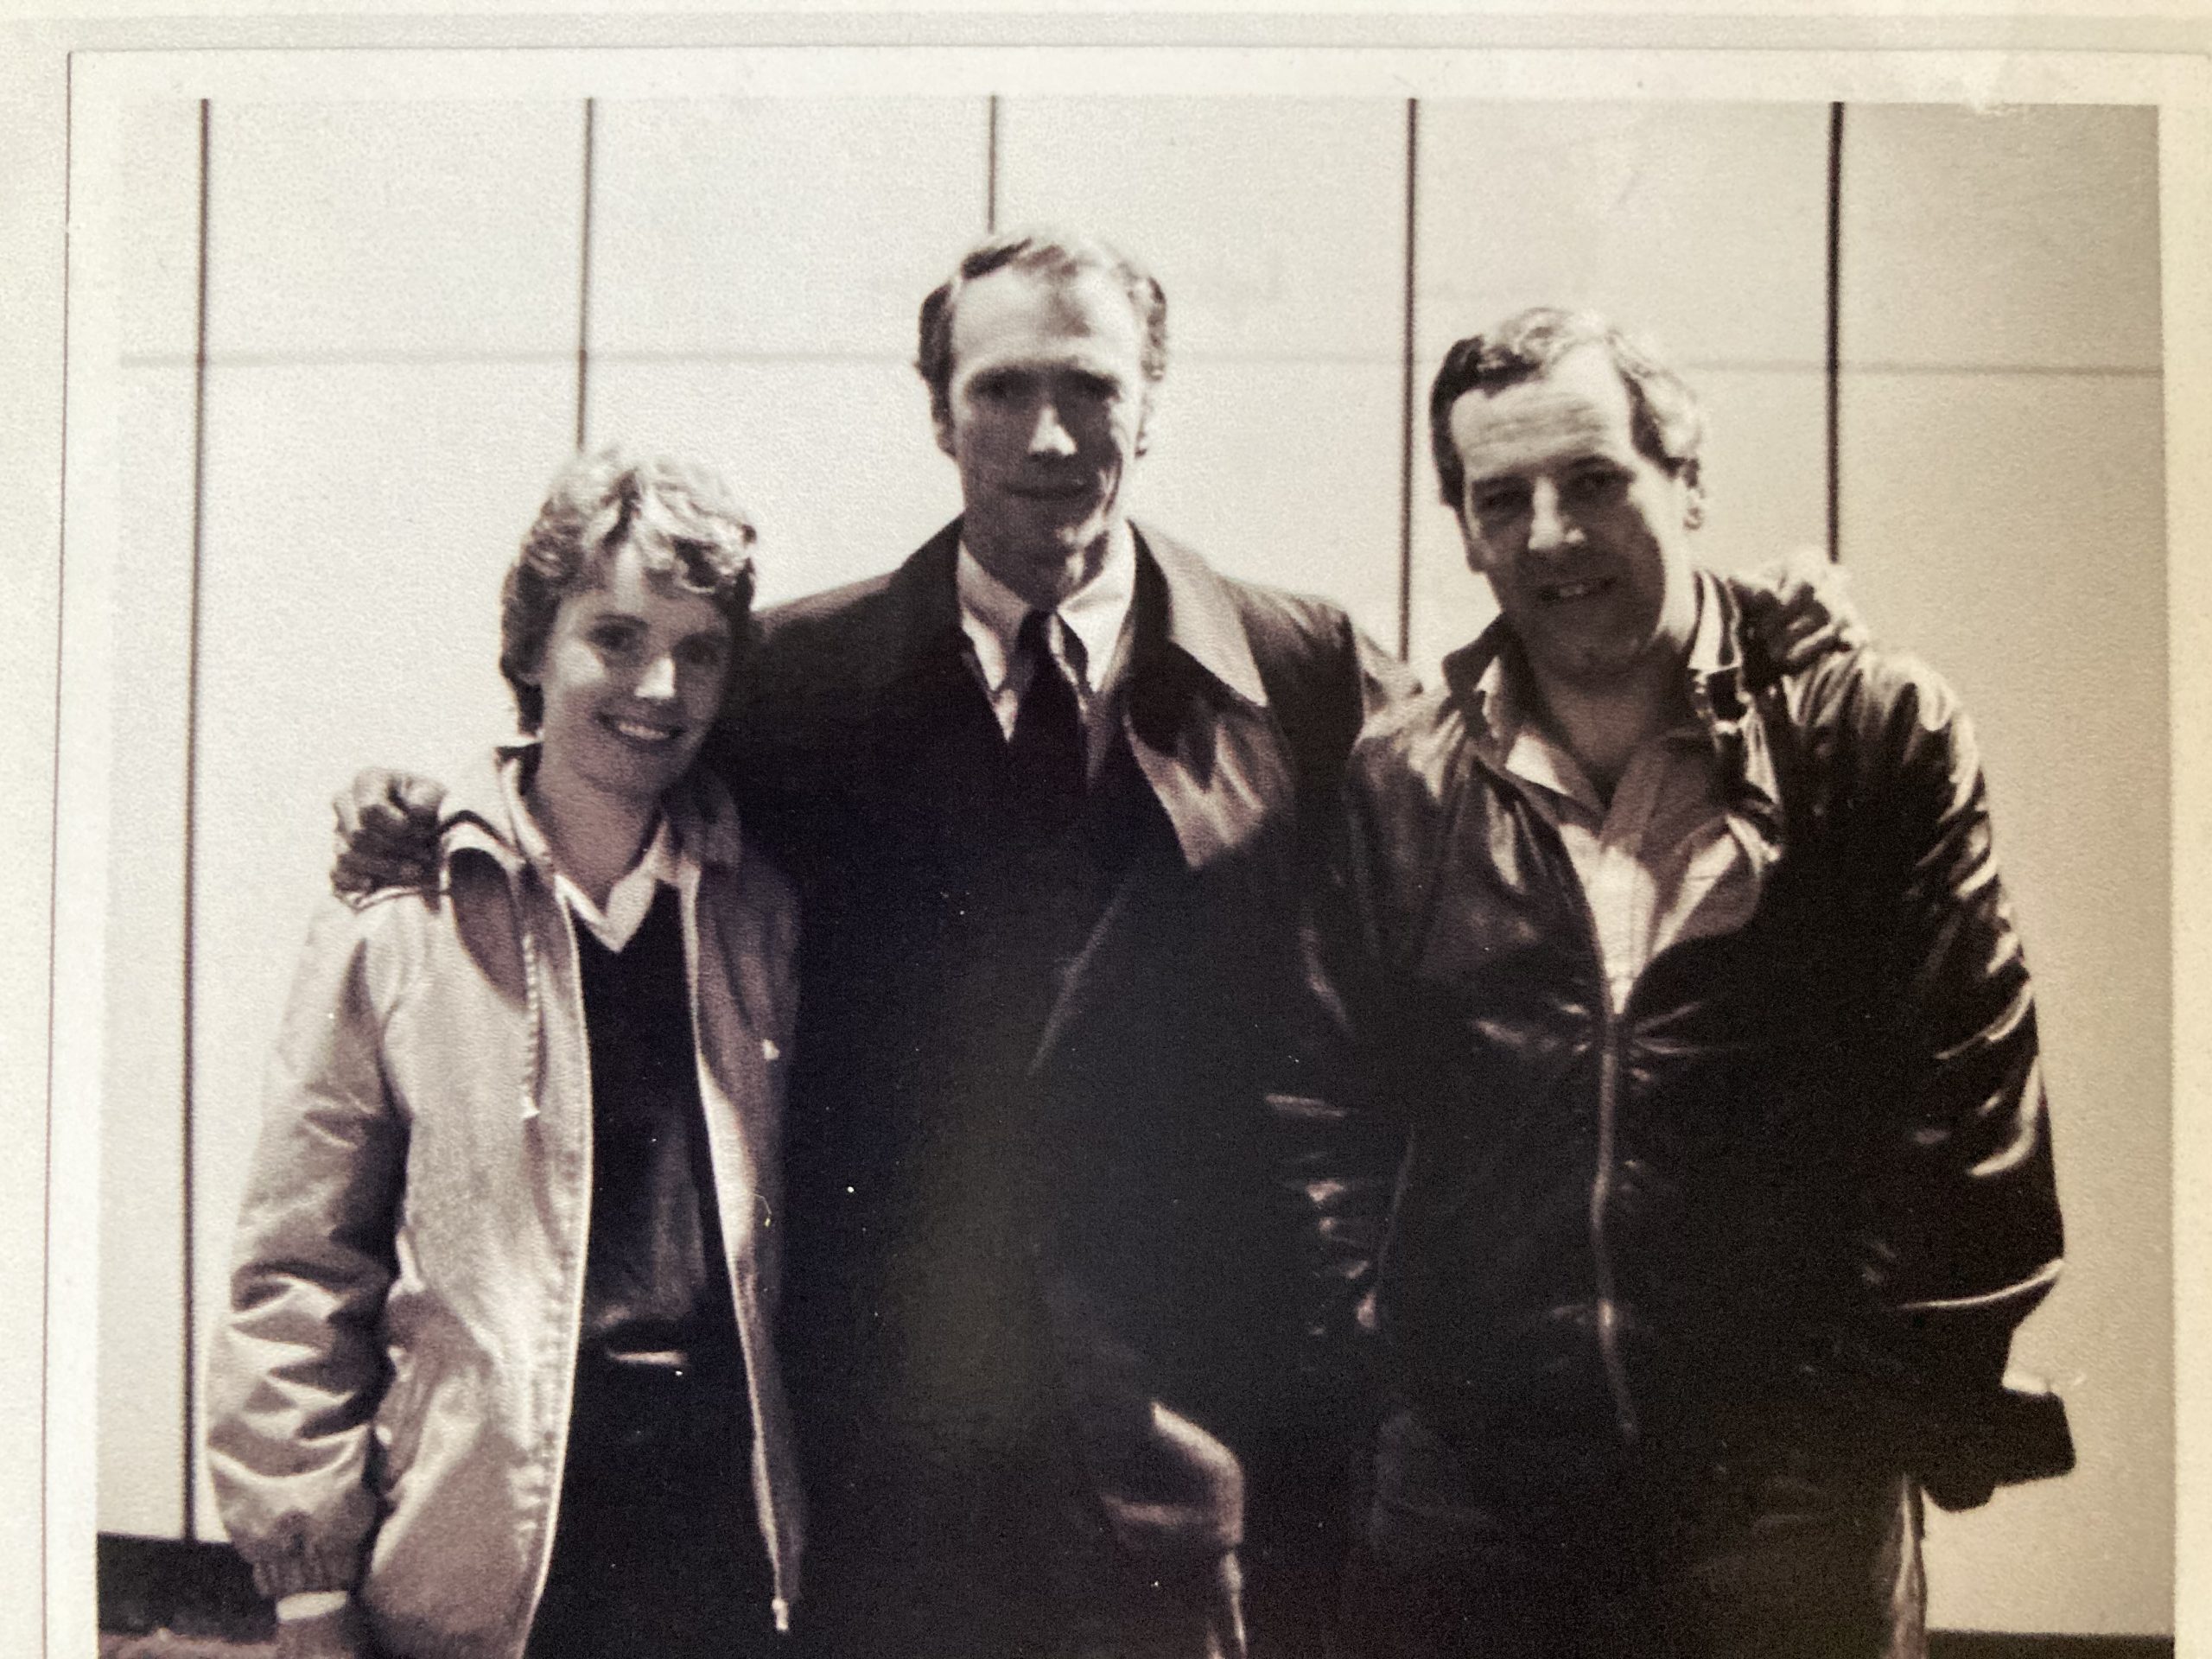 Craig Thomas and his wife Jill with Clint Eastwood. Photo courtesy of the Estate of Jill Thomas.